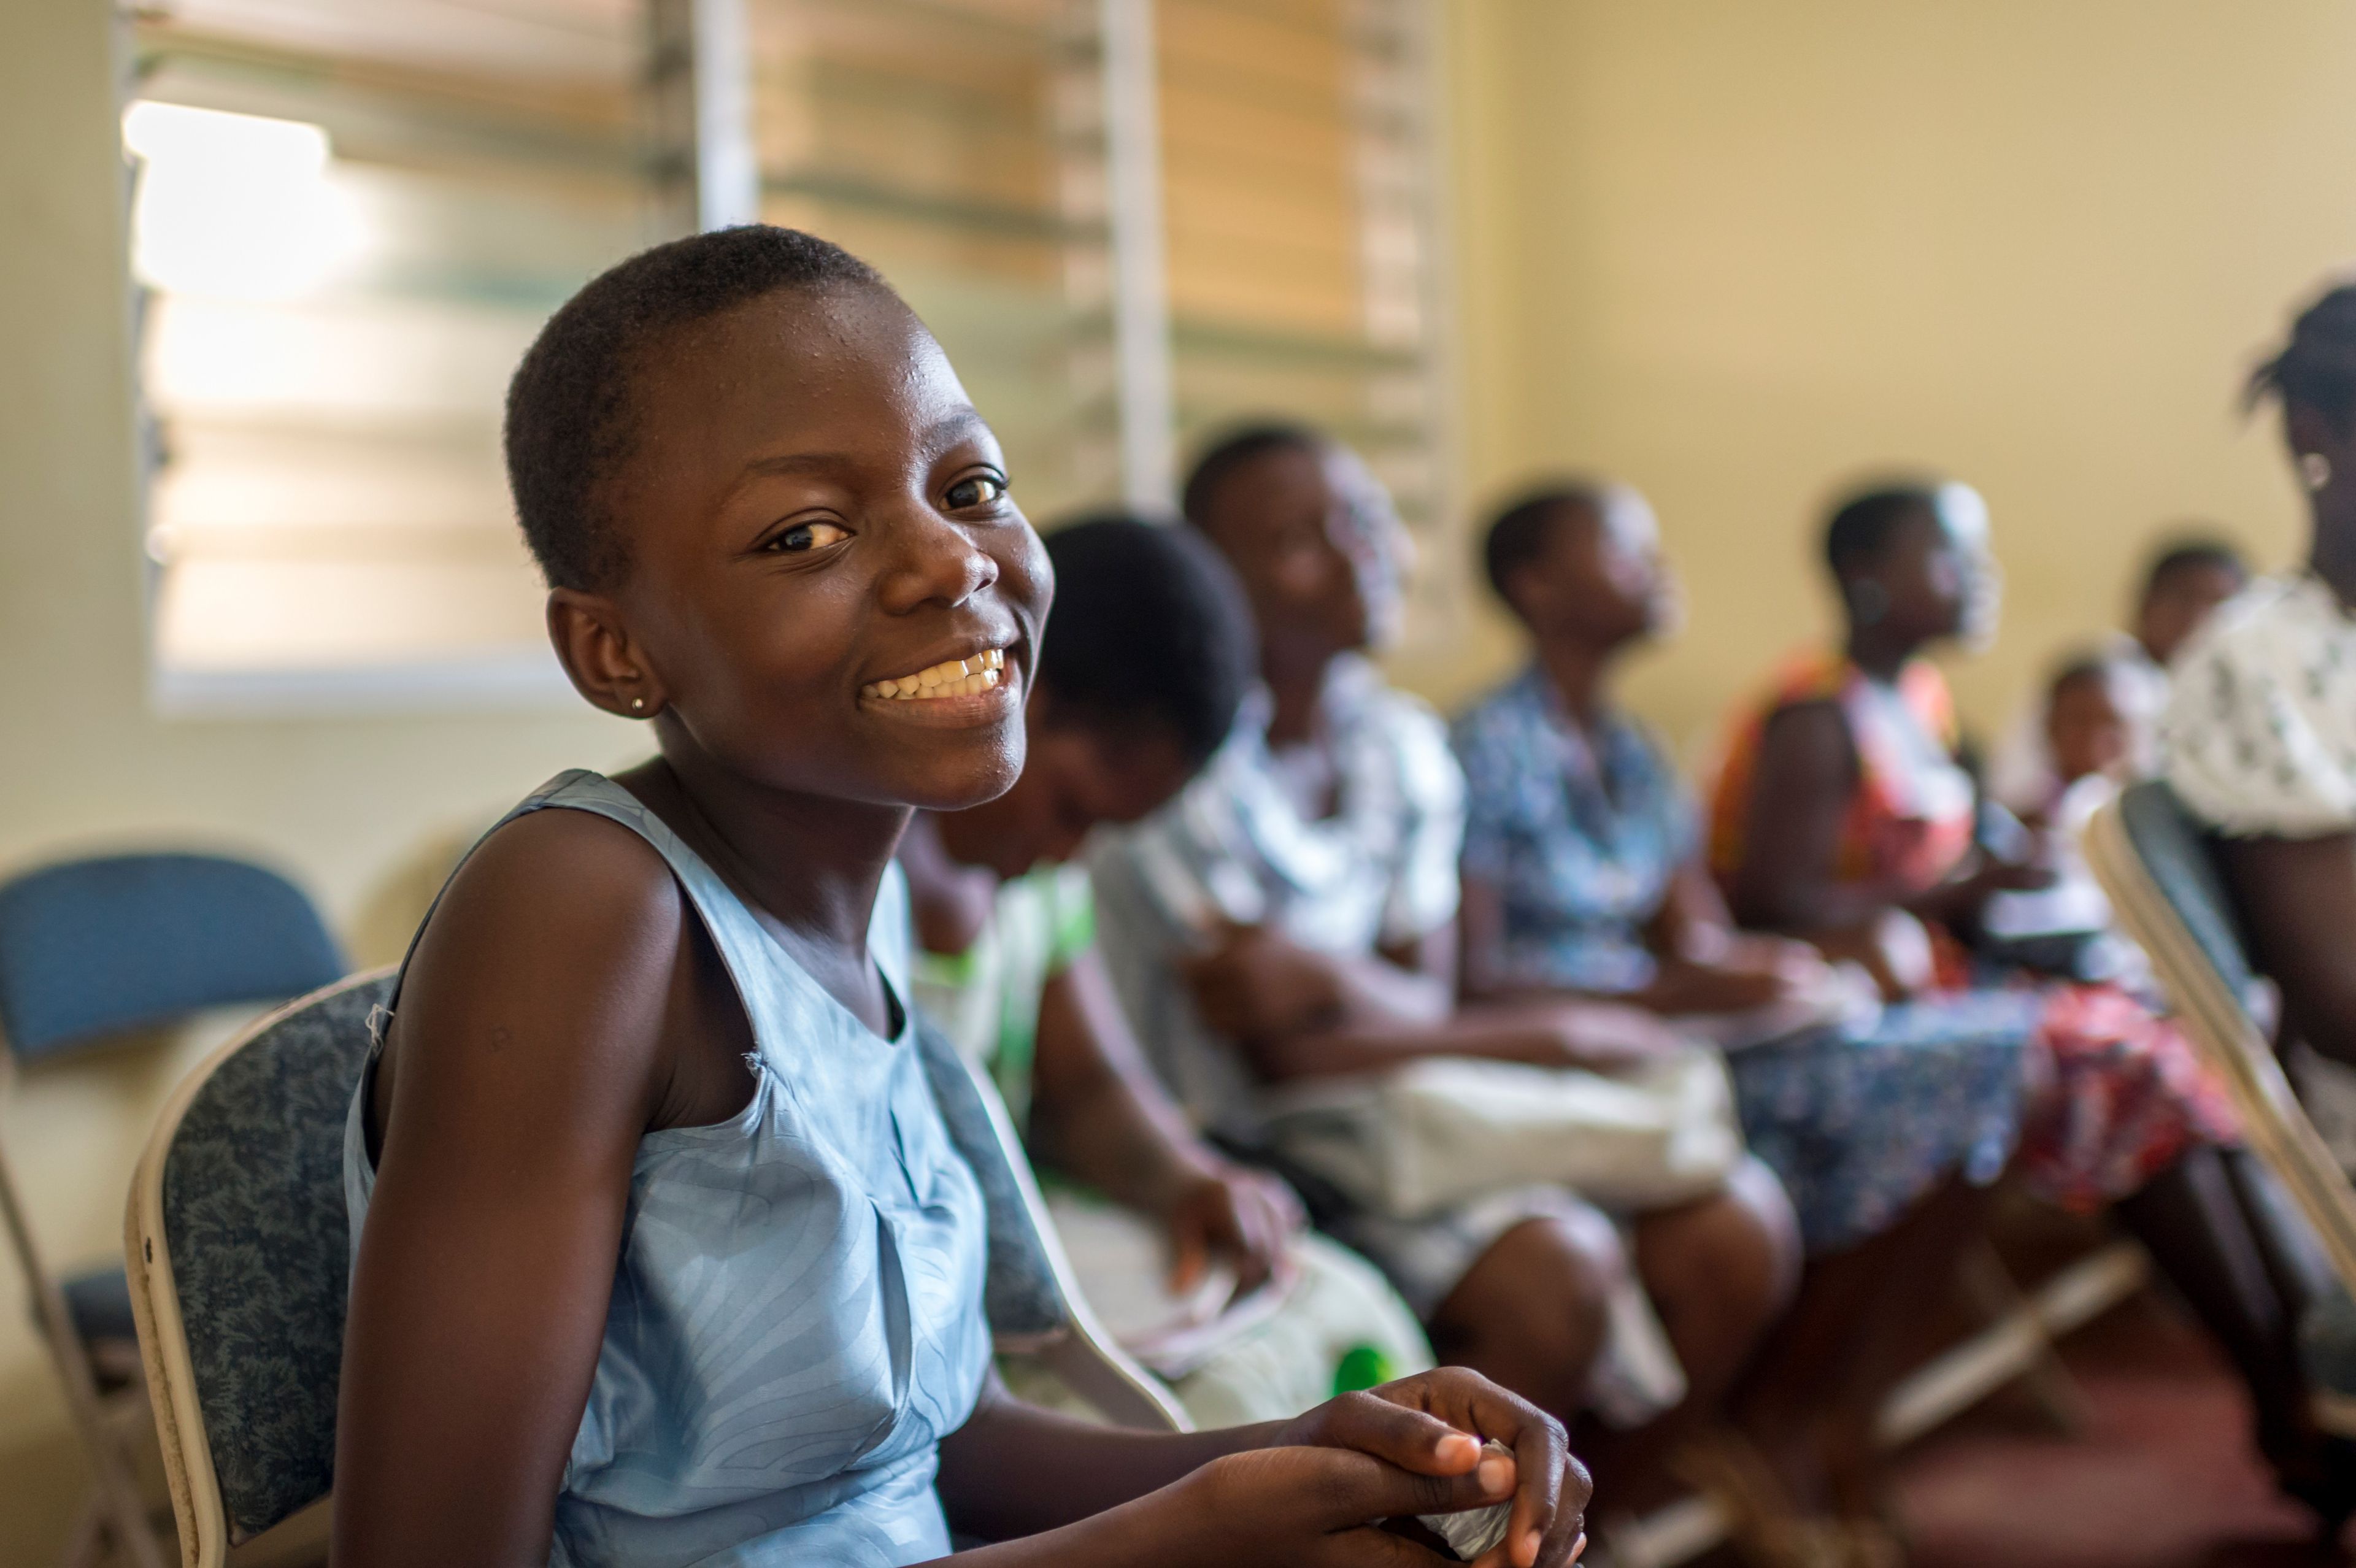 A young girl in Sunday School in Africa sits in a chair and smiles.